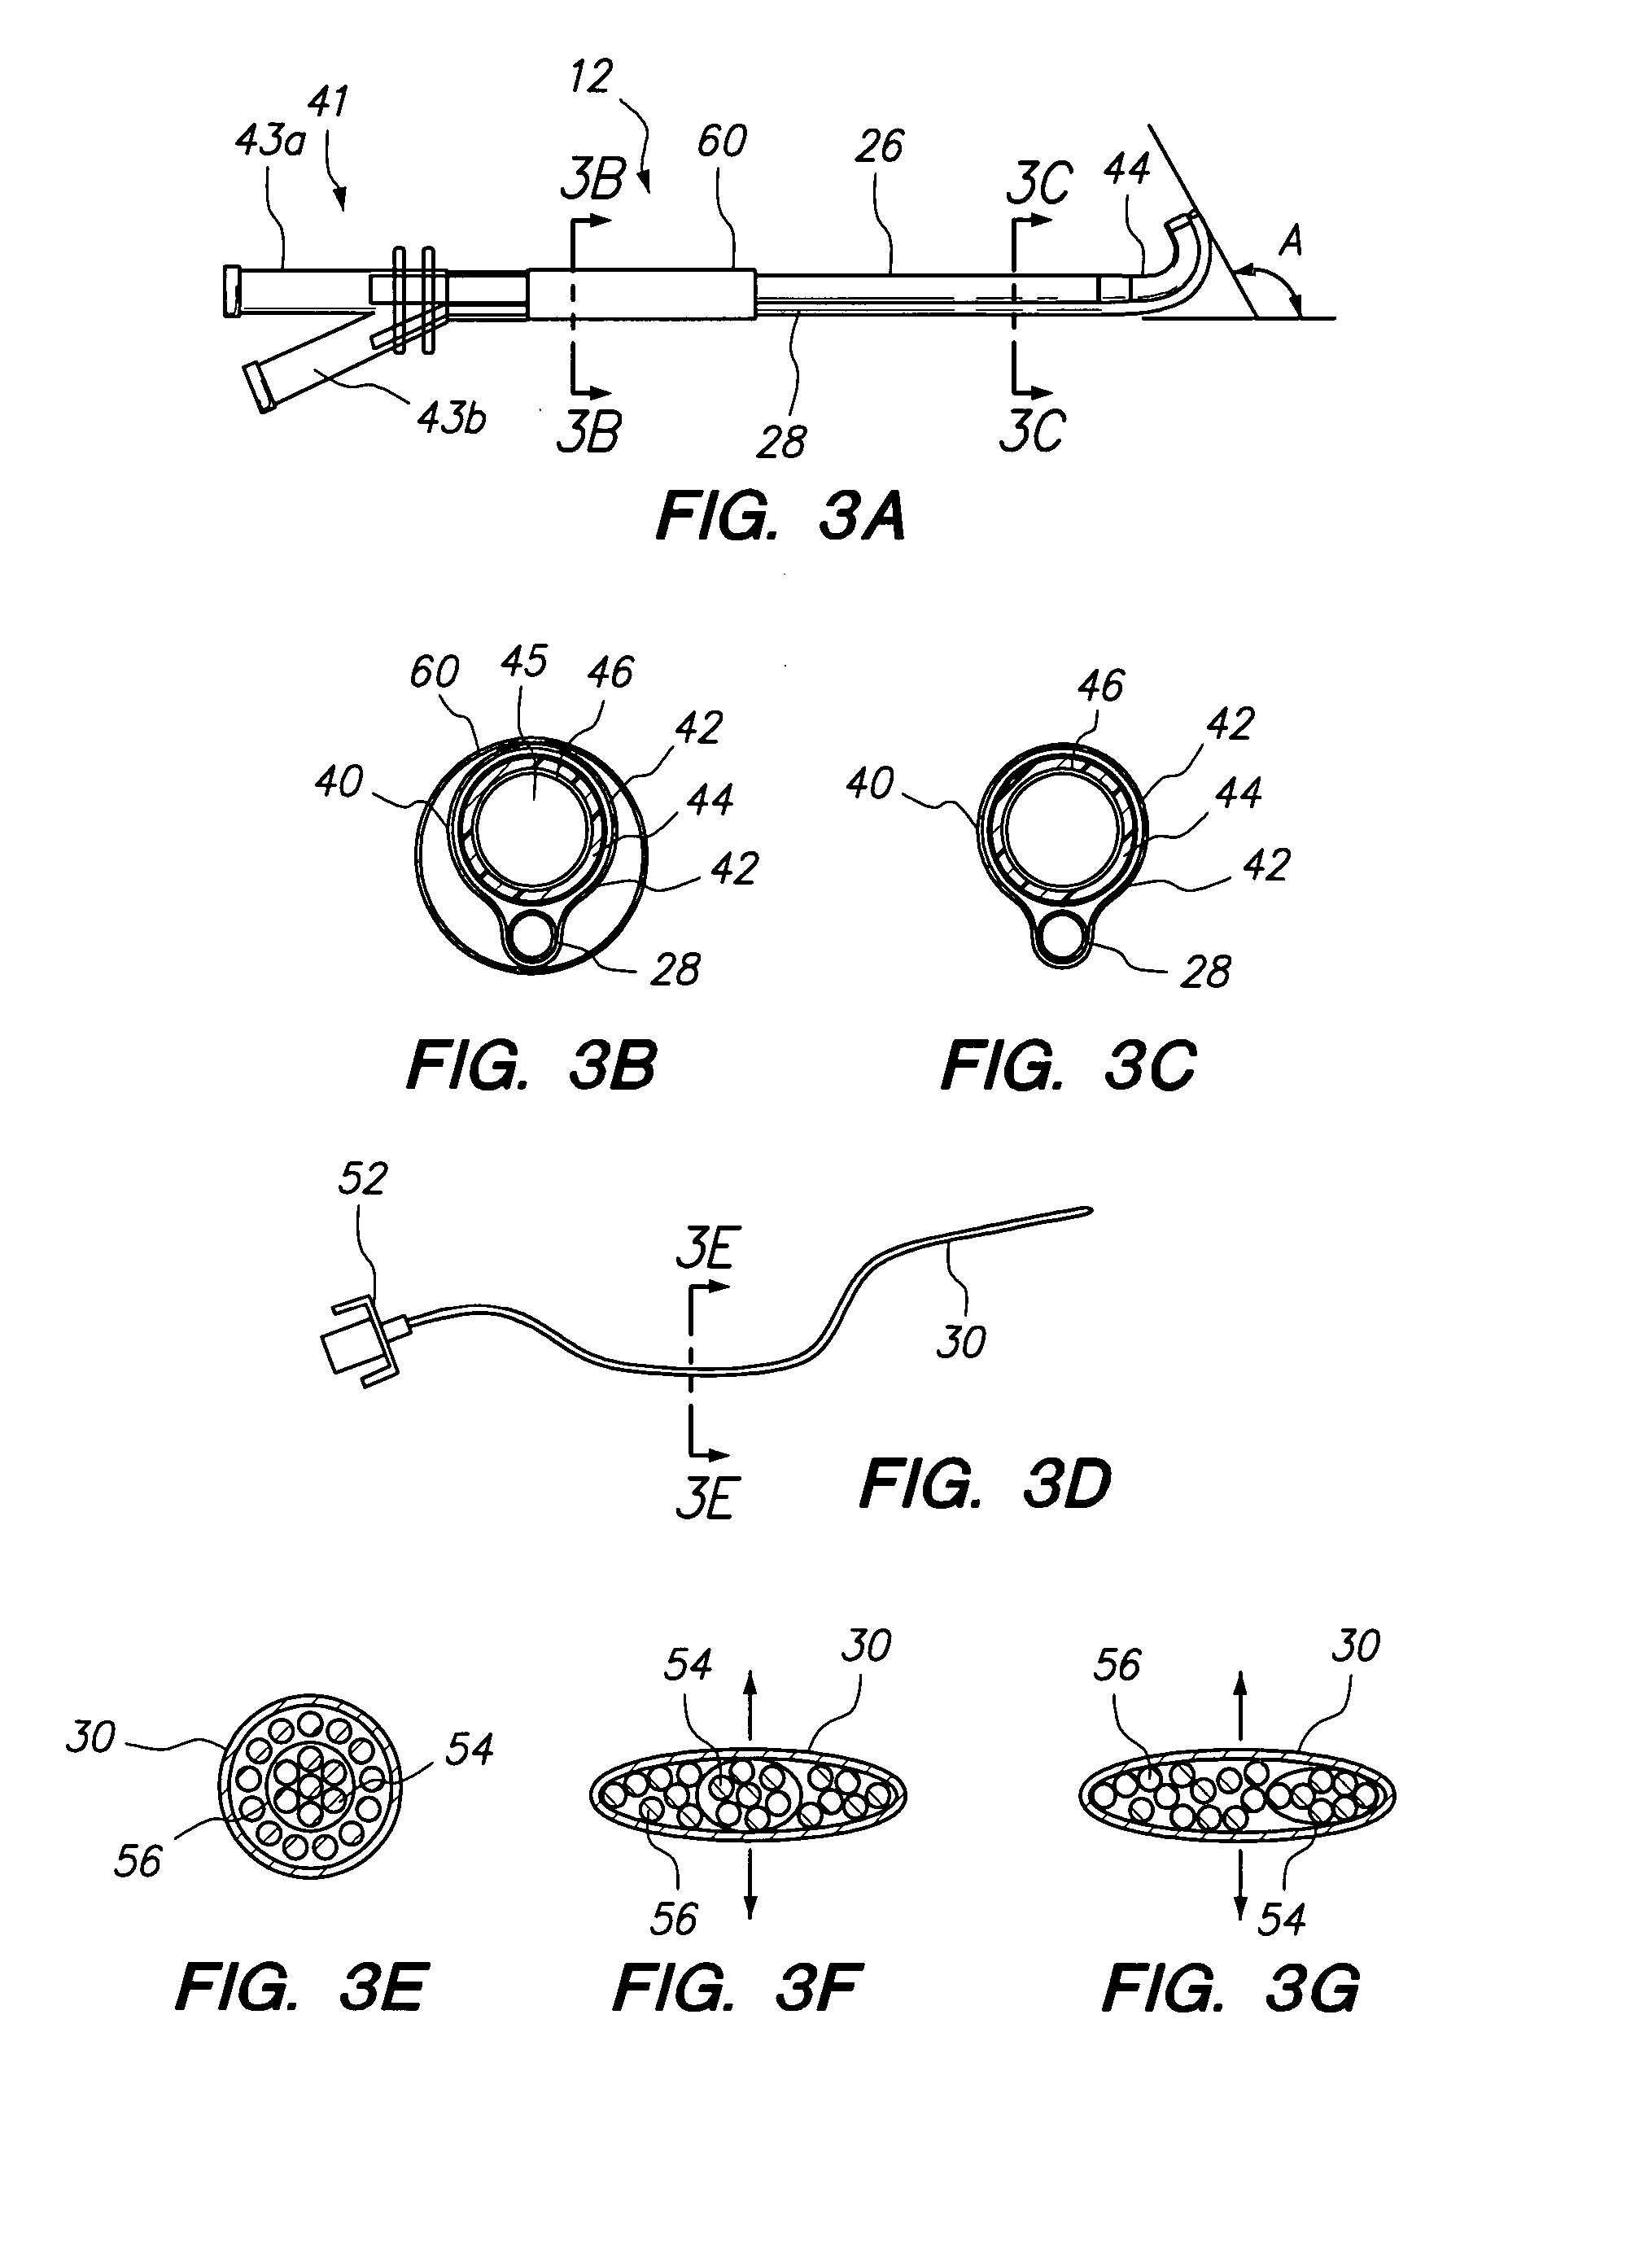 Endoscopic methods and devices for transnasal procedures